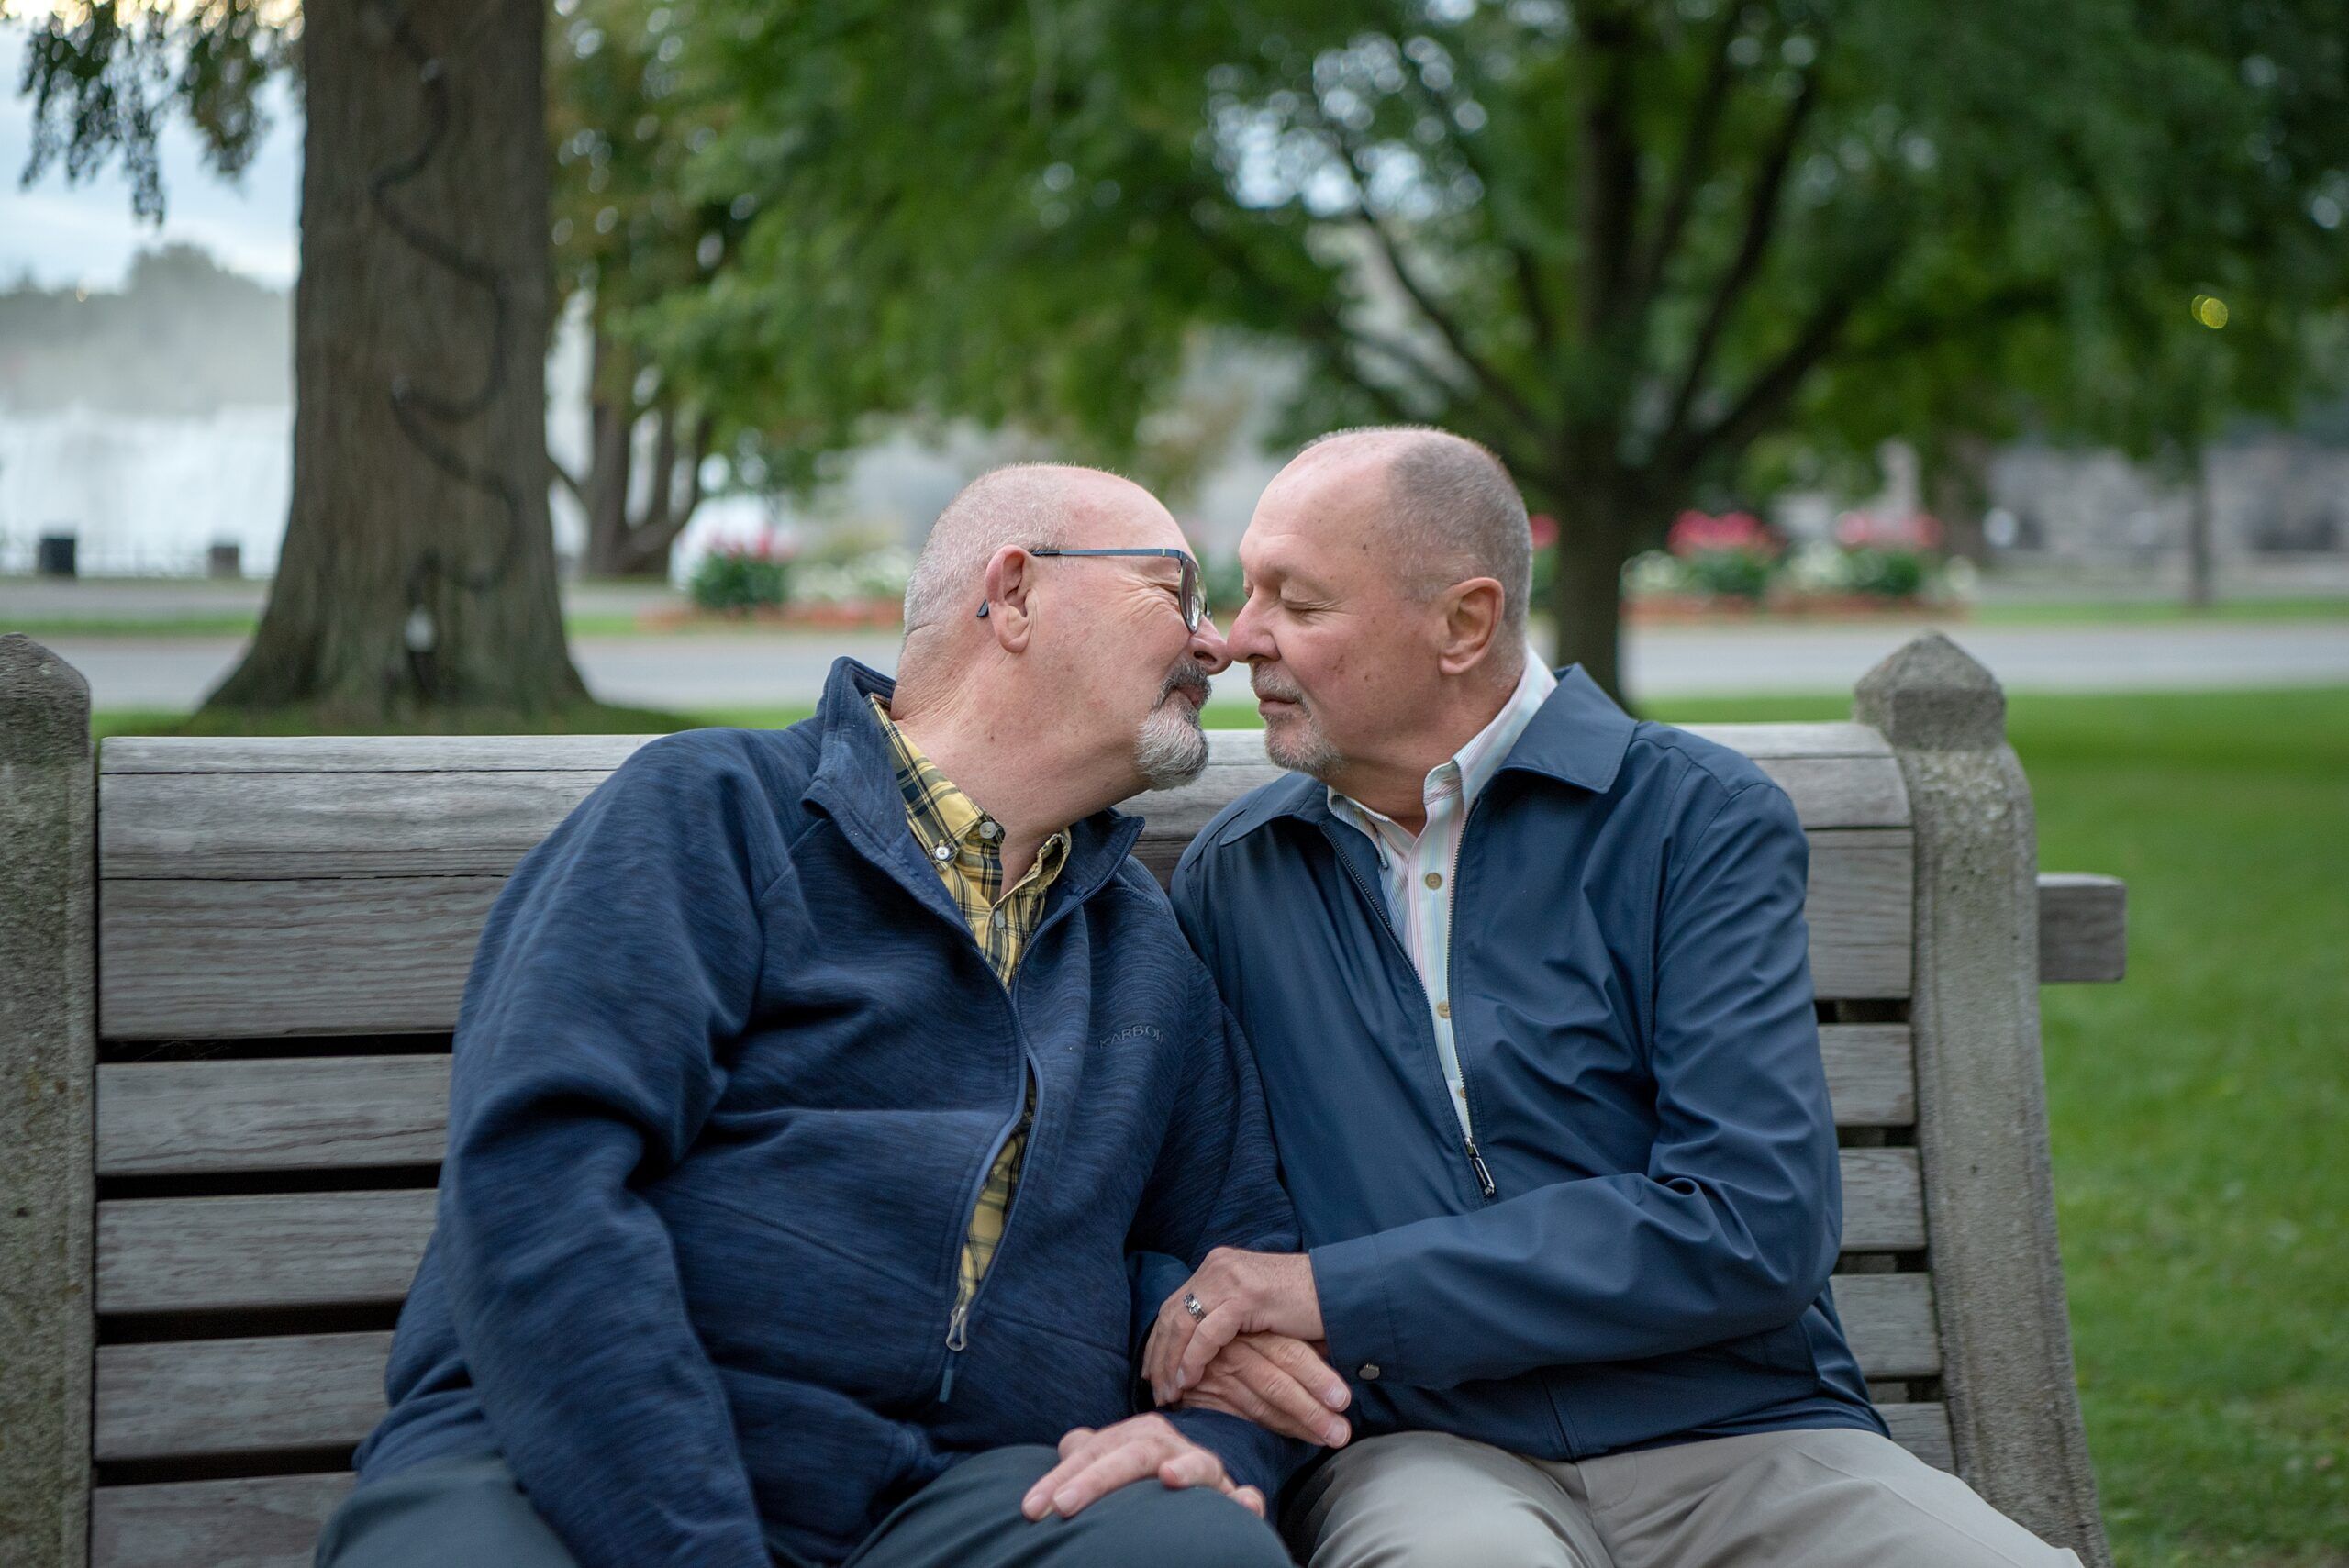 Elderly gay couple sitting on a park bench lean in to kiss each other. One has his arms linked through his partner's arms. Love and affection.